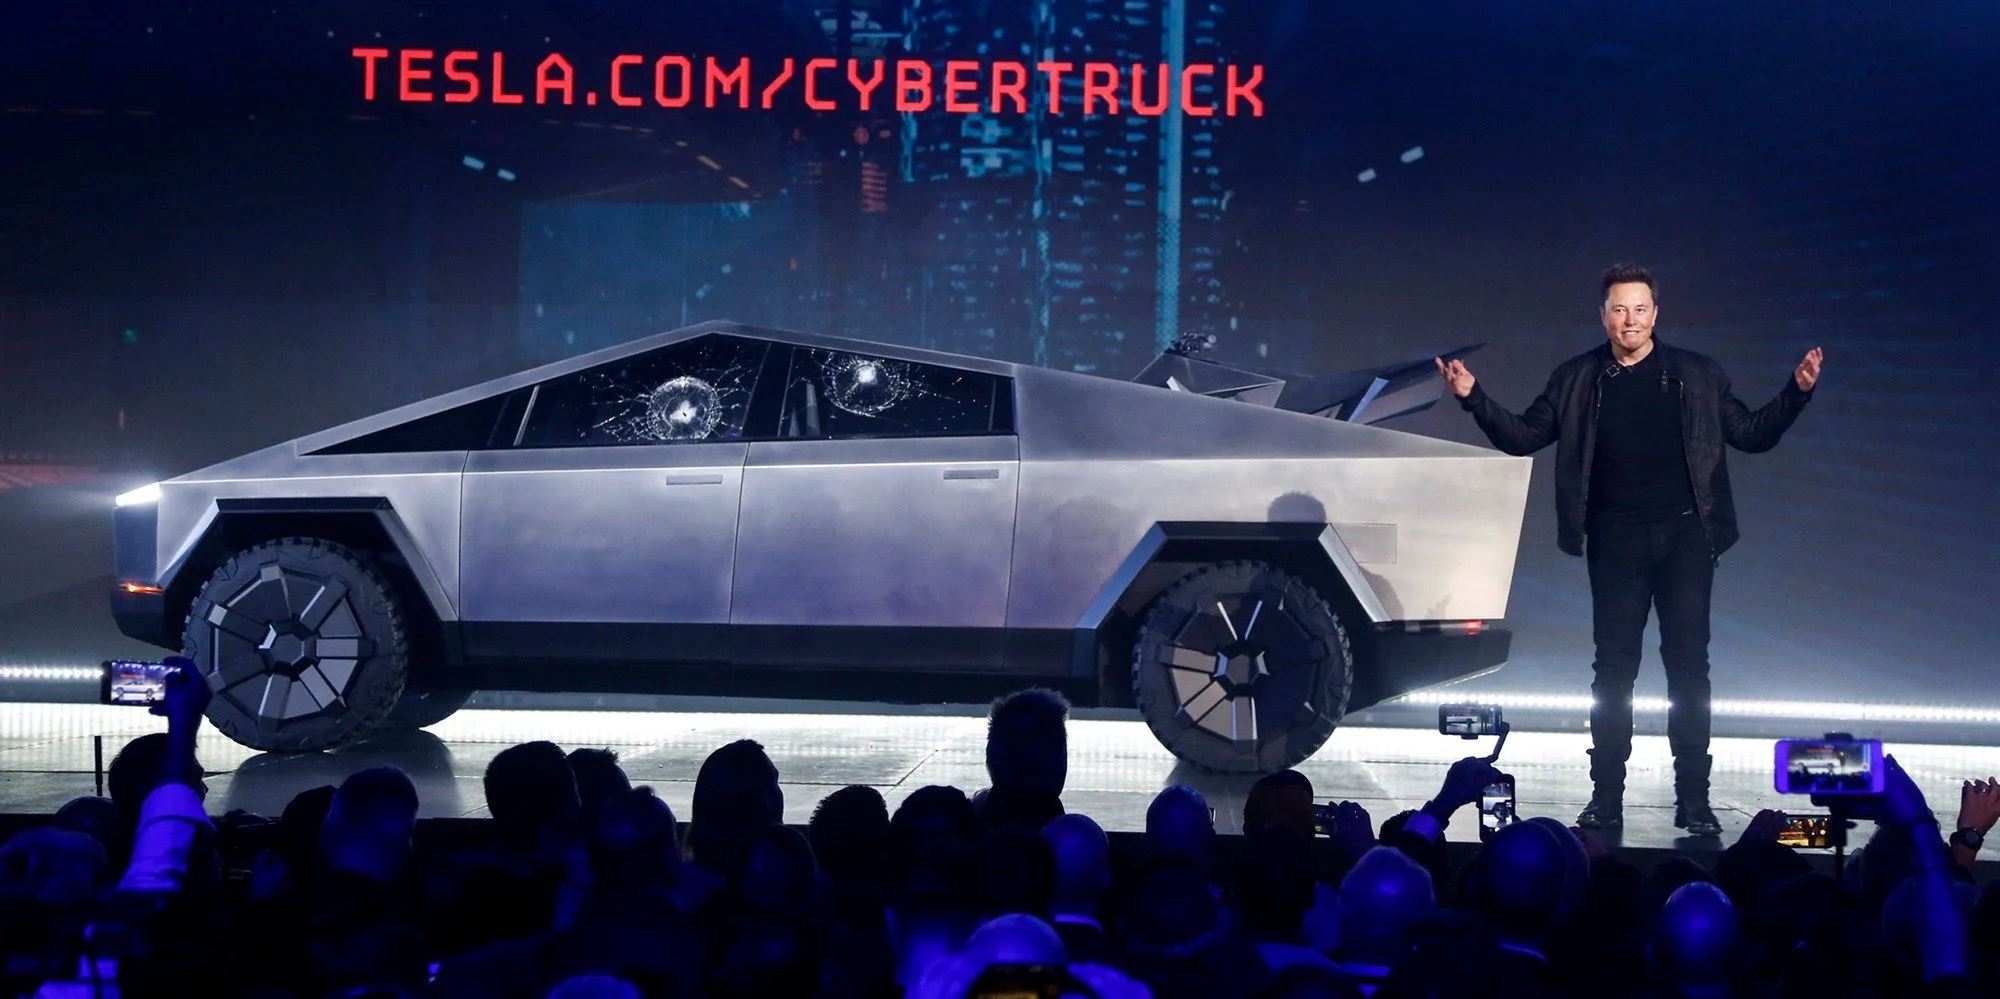 How Tesla Championed Marketing: Why the Cybertruck deserves attention!